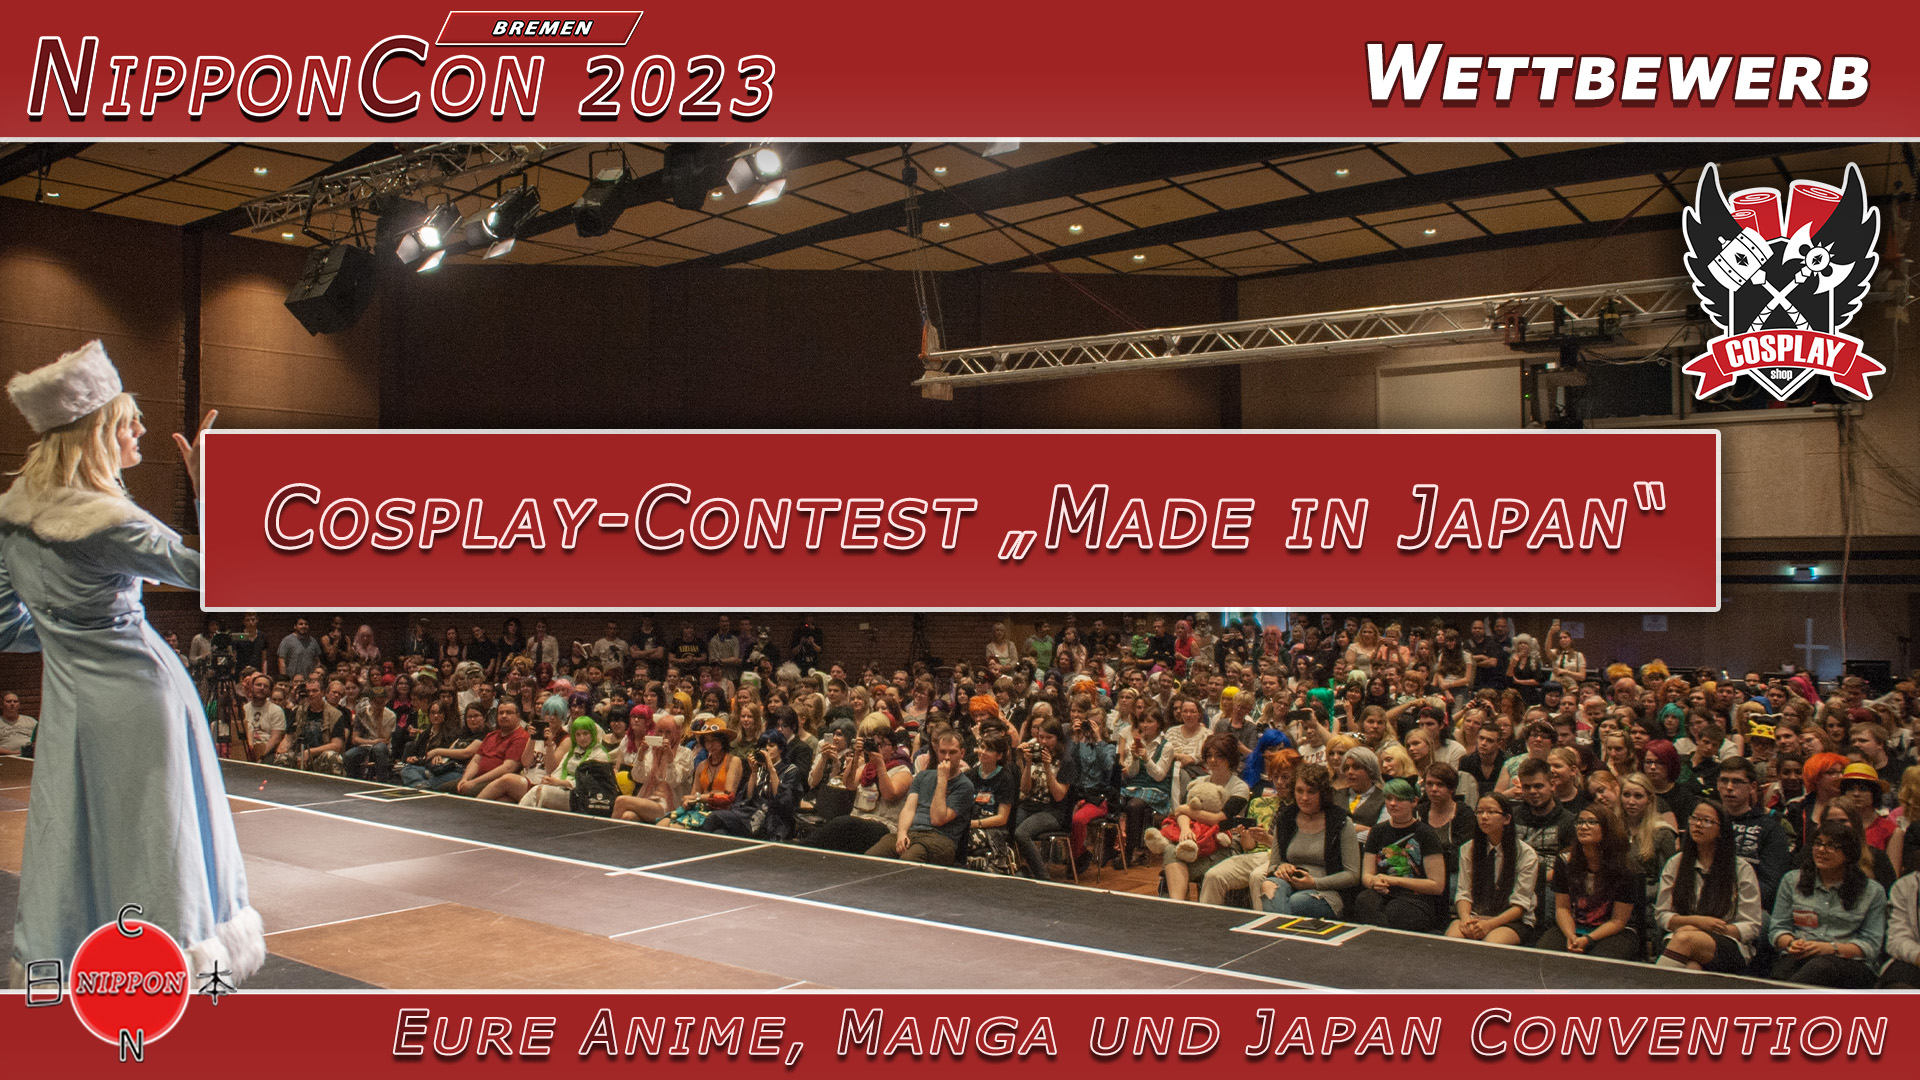 NipponCon 2023 Bremen. Wettbewerb. Cosplay-Contest "Made in Japan". Sponsor Cosplayshop punkt d e.